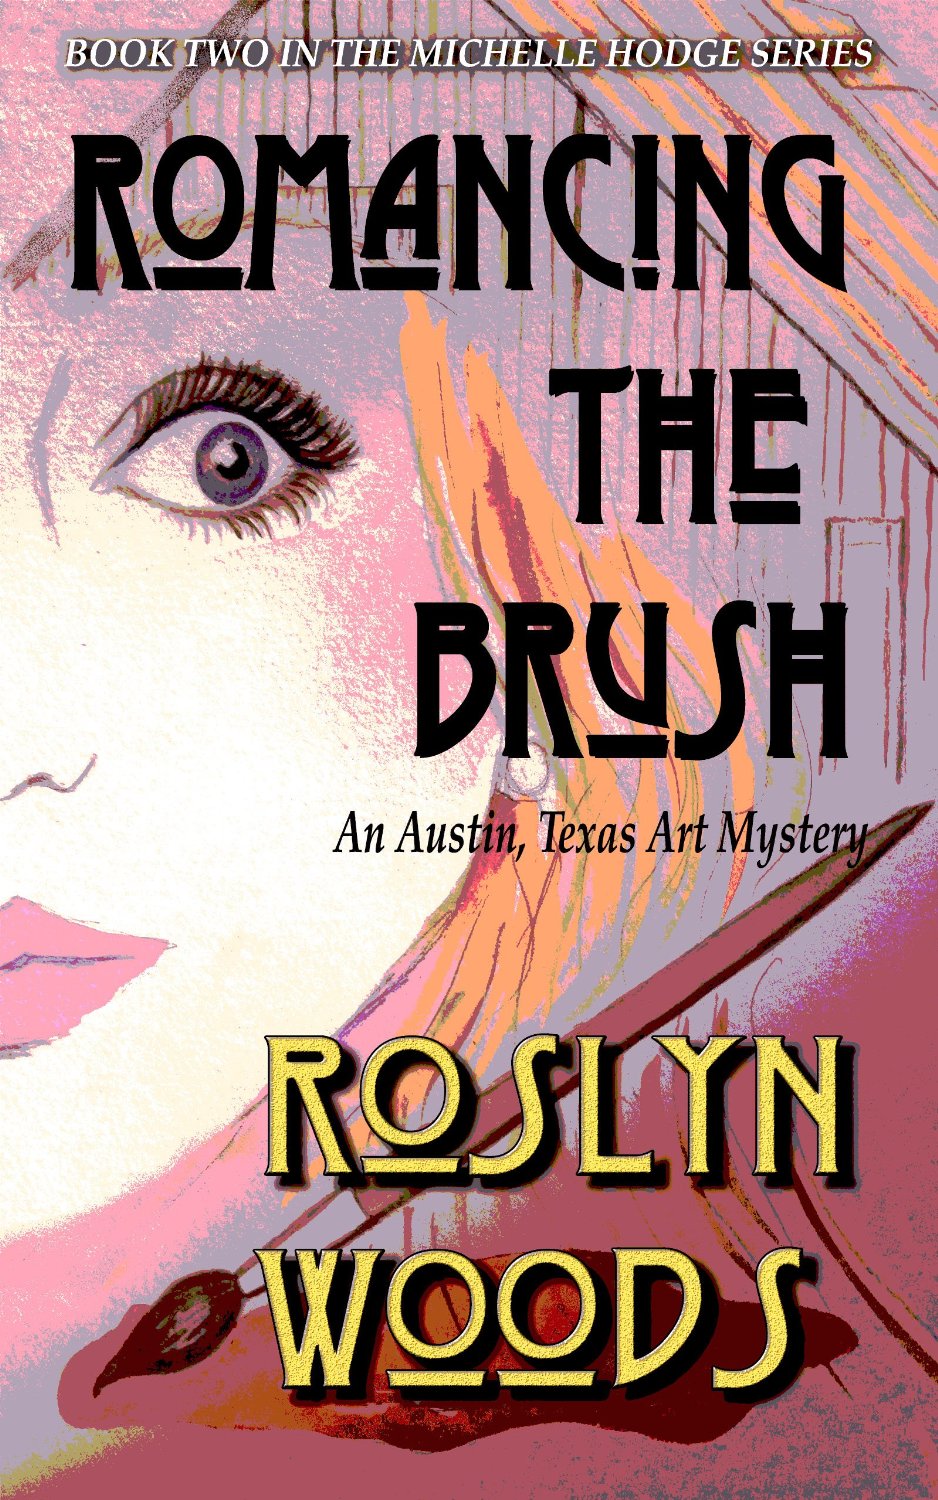 Romancing the Brush: An Austin, Texas Art Mystery (The Michelle Hodge Series Book 2) by Roslyn Woods